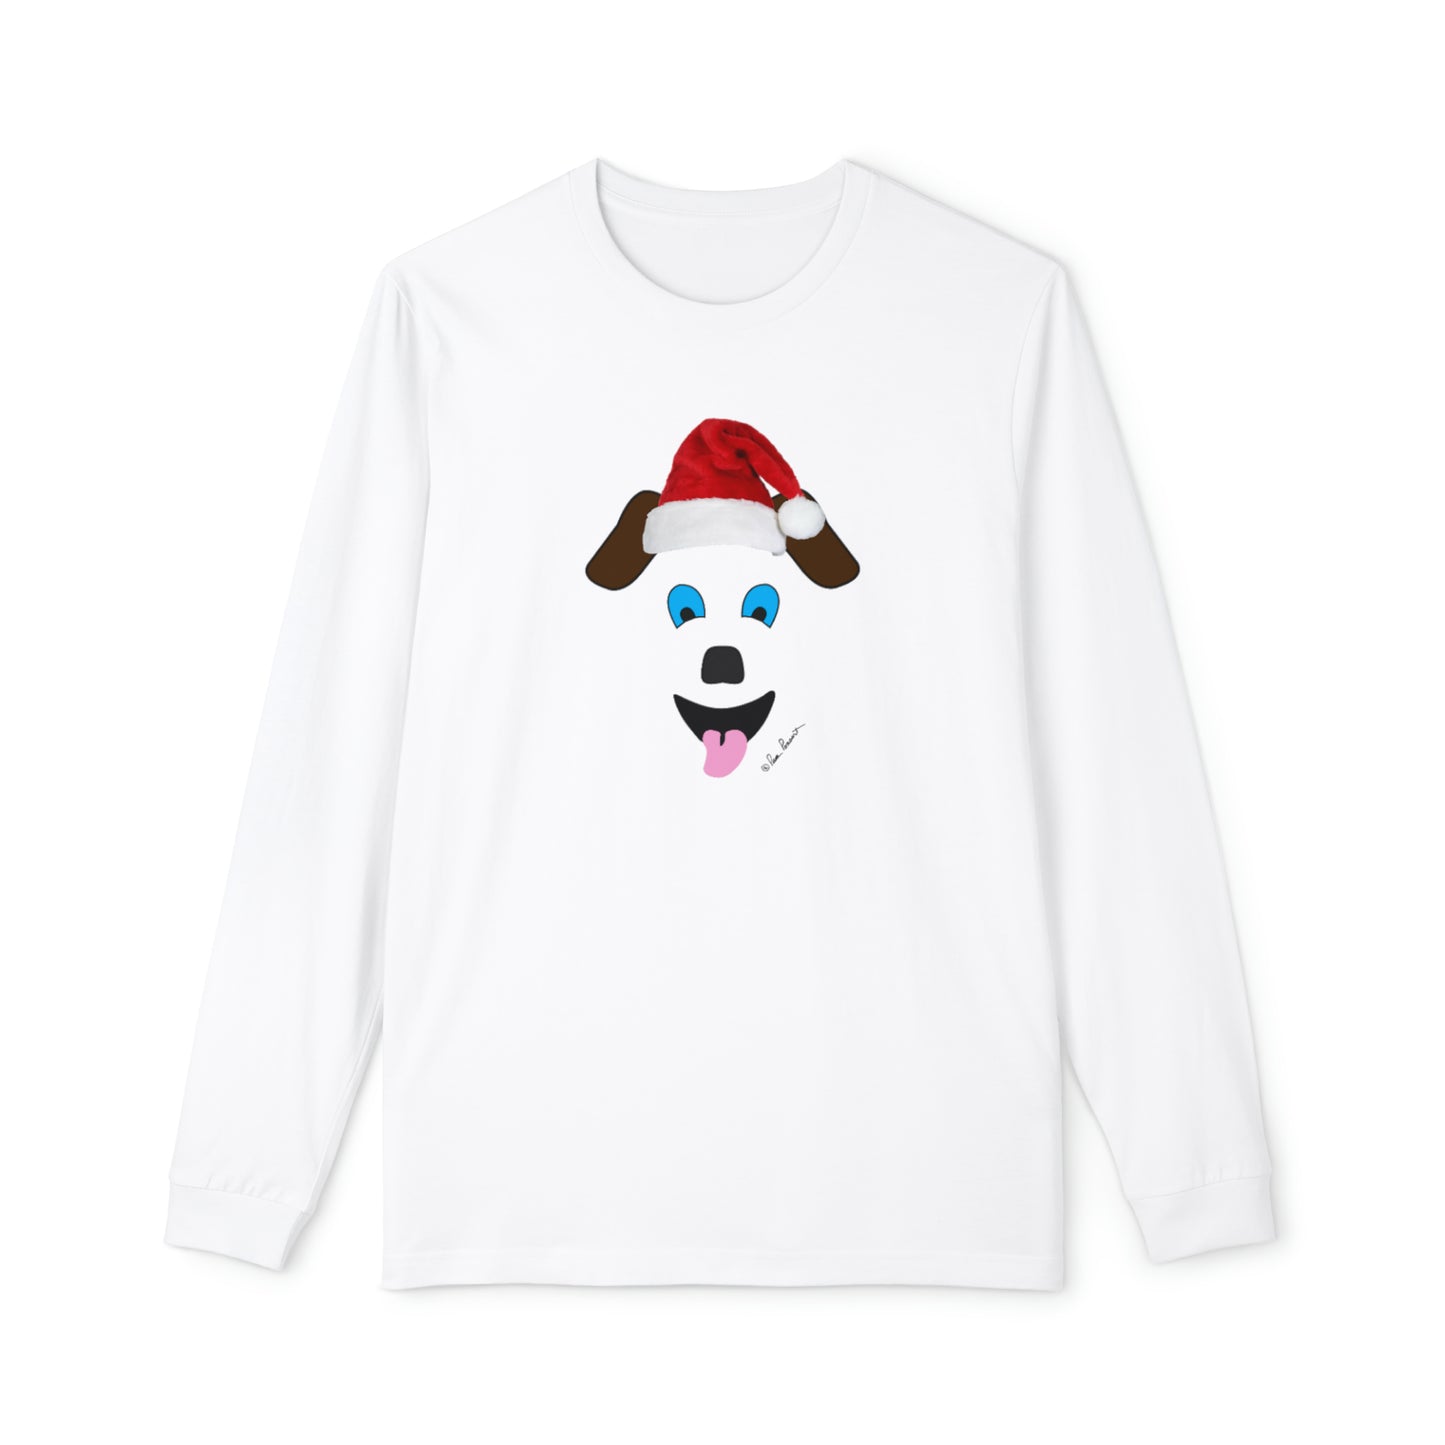 A custom-made Printify white long-sleeve pajama set featuring a dog in a Santa hat. Made of 100% cotton, perfect for women's loungewear attire.